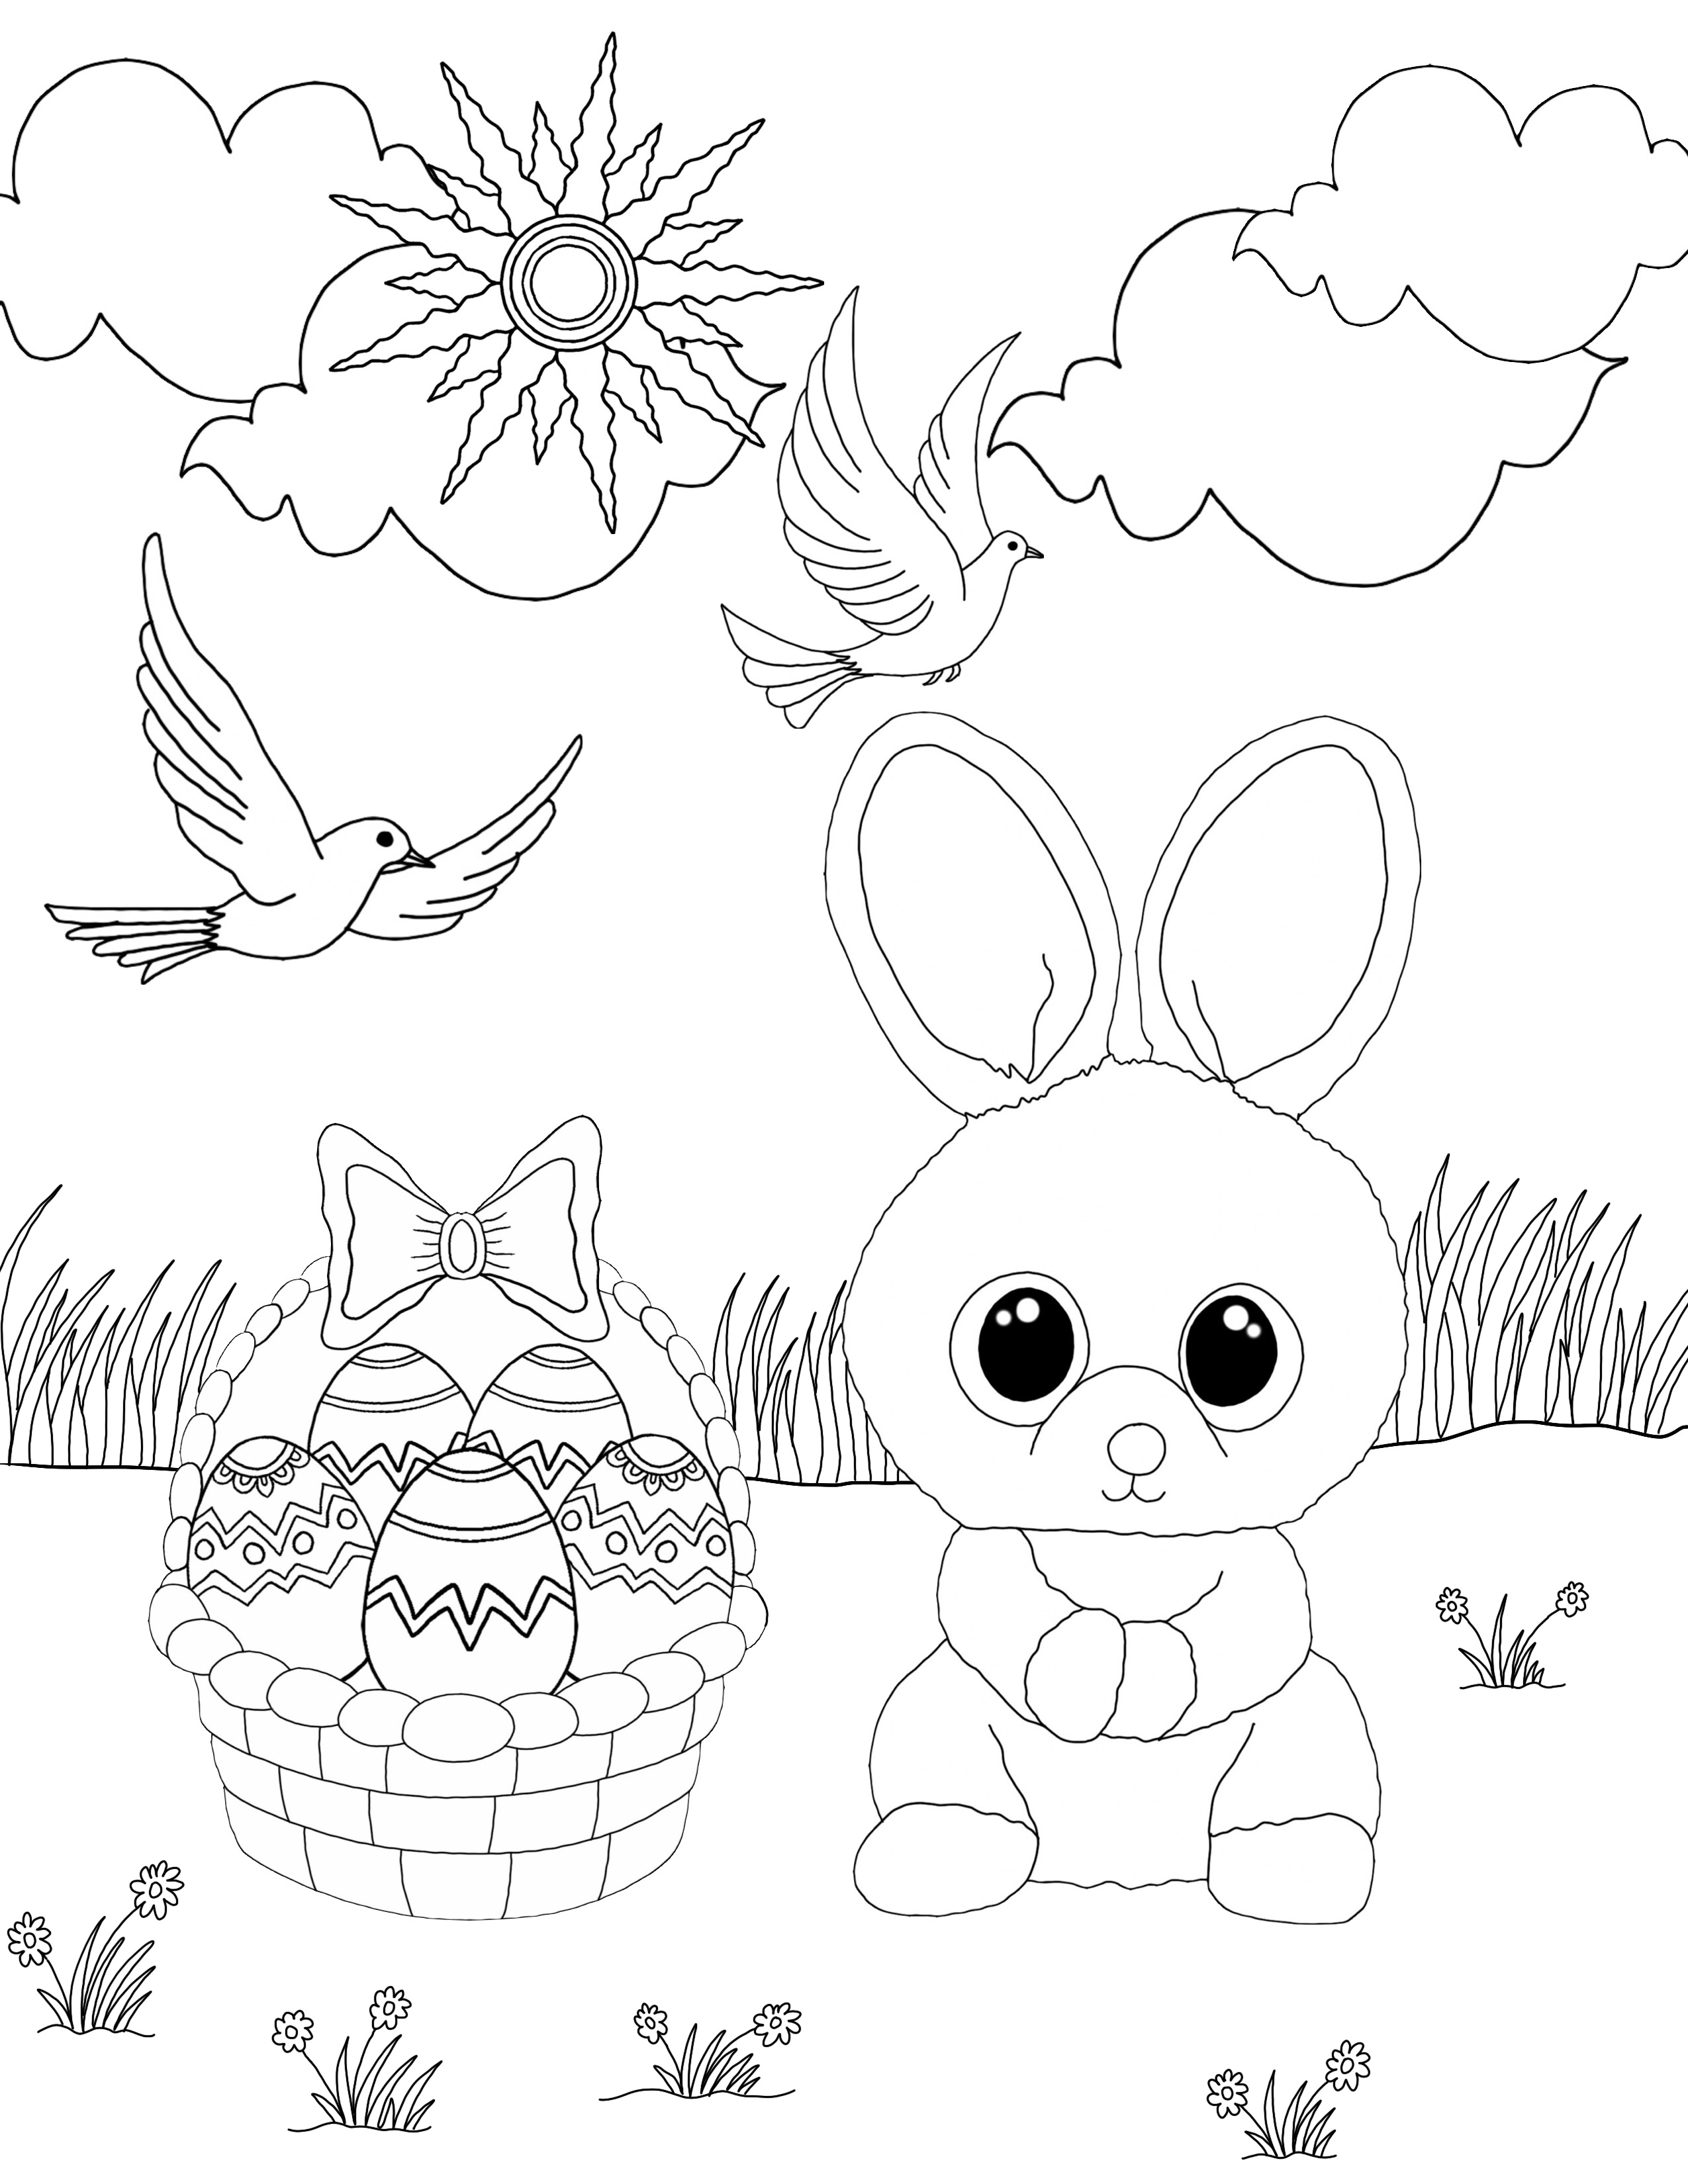 Free Beanie Boo Coloring Pages Download & Print: Cats, Dogs ...